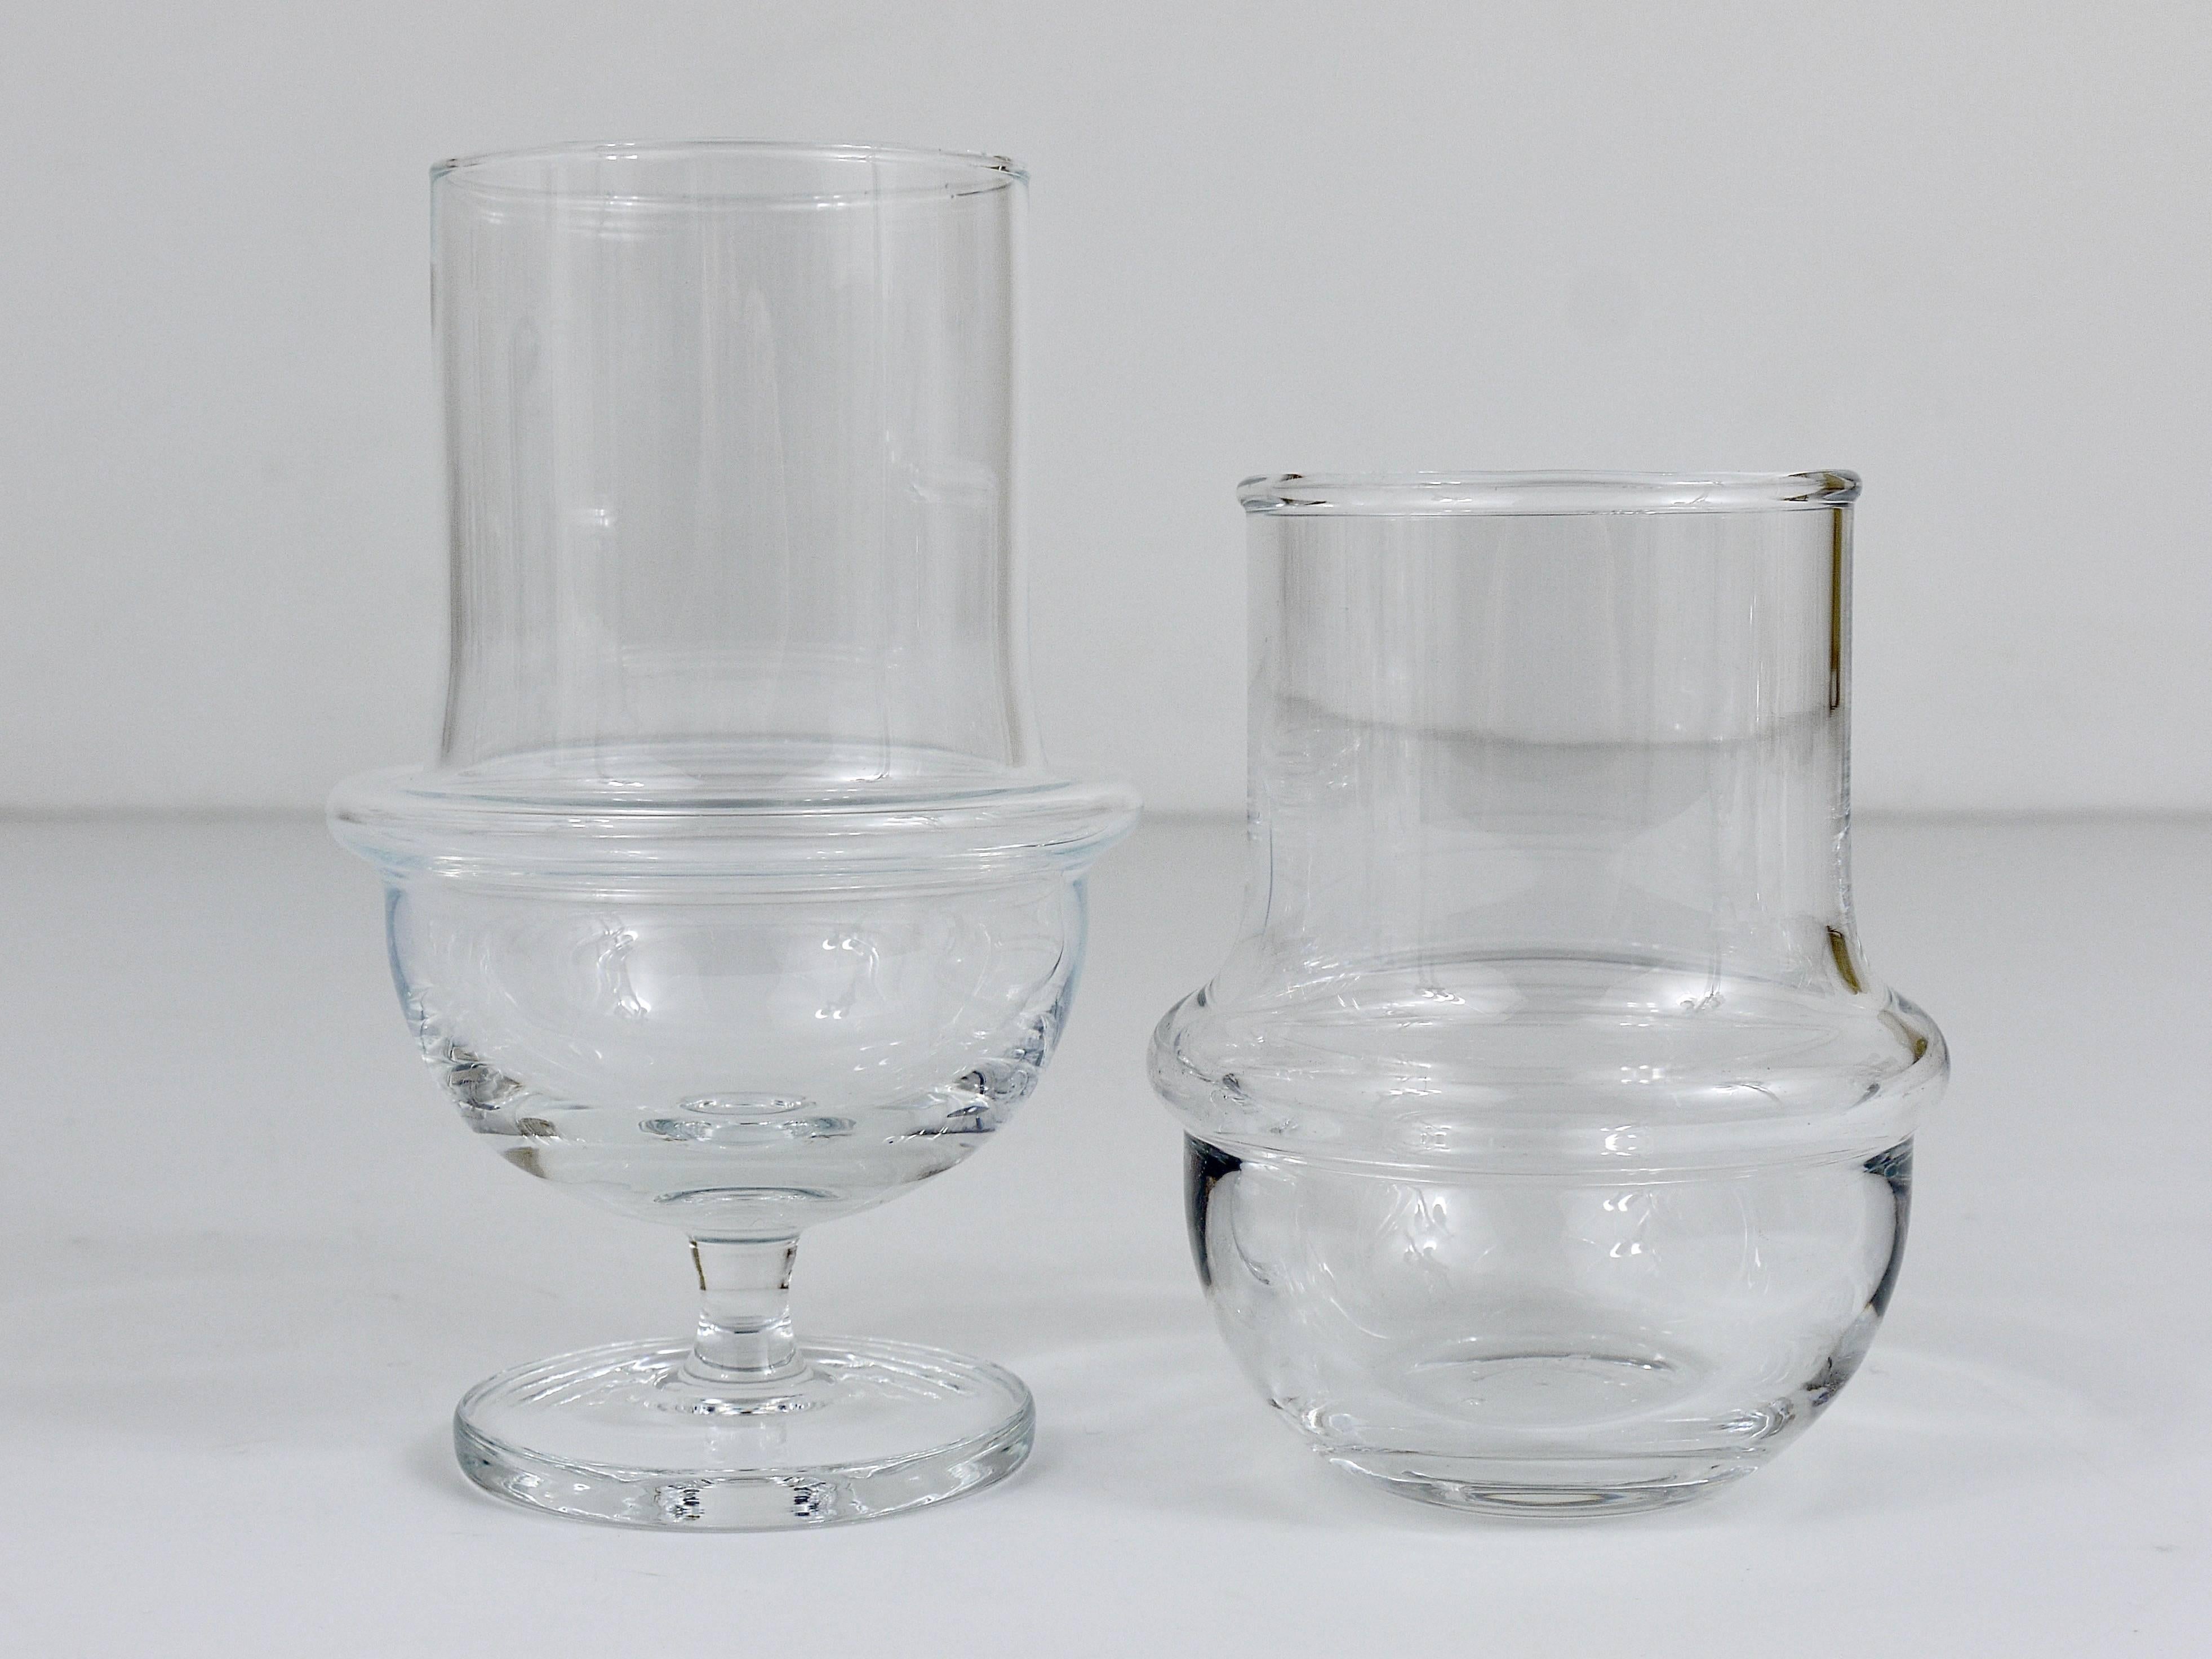 A set of six modernist stem glasses or drinking glasses designed by Carl Aubock, executed by Ostovics Culinar. Austria, 1970s. Very beautiful, unusual and rare glasses in excellent condition. We offer a matching set of six water glasses without